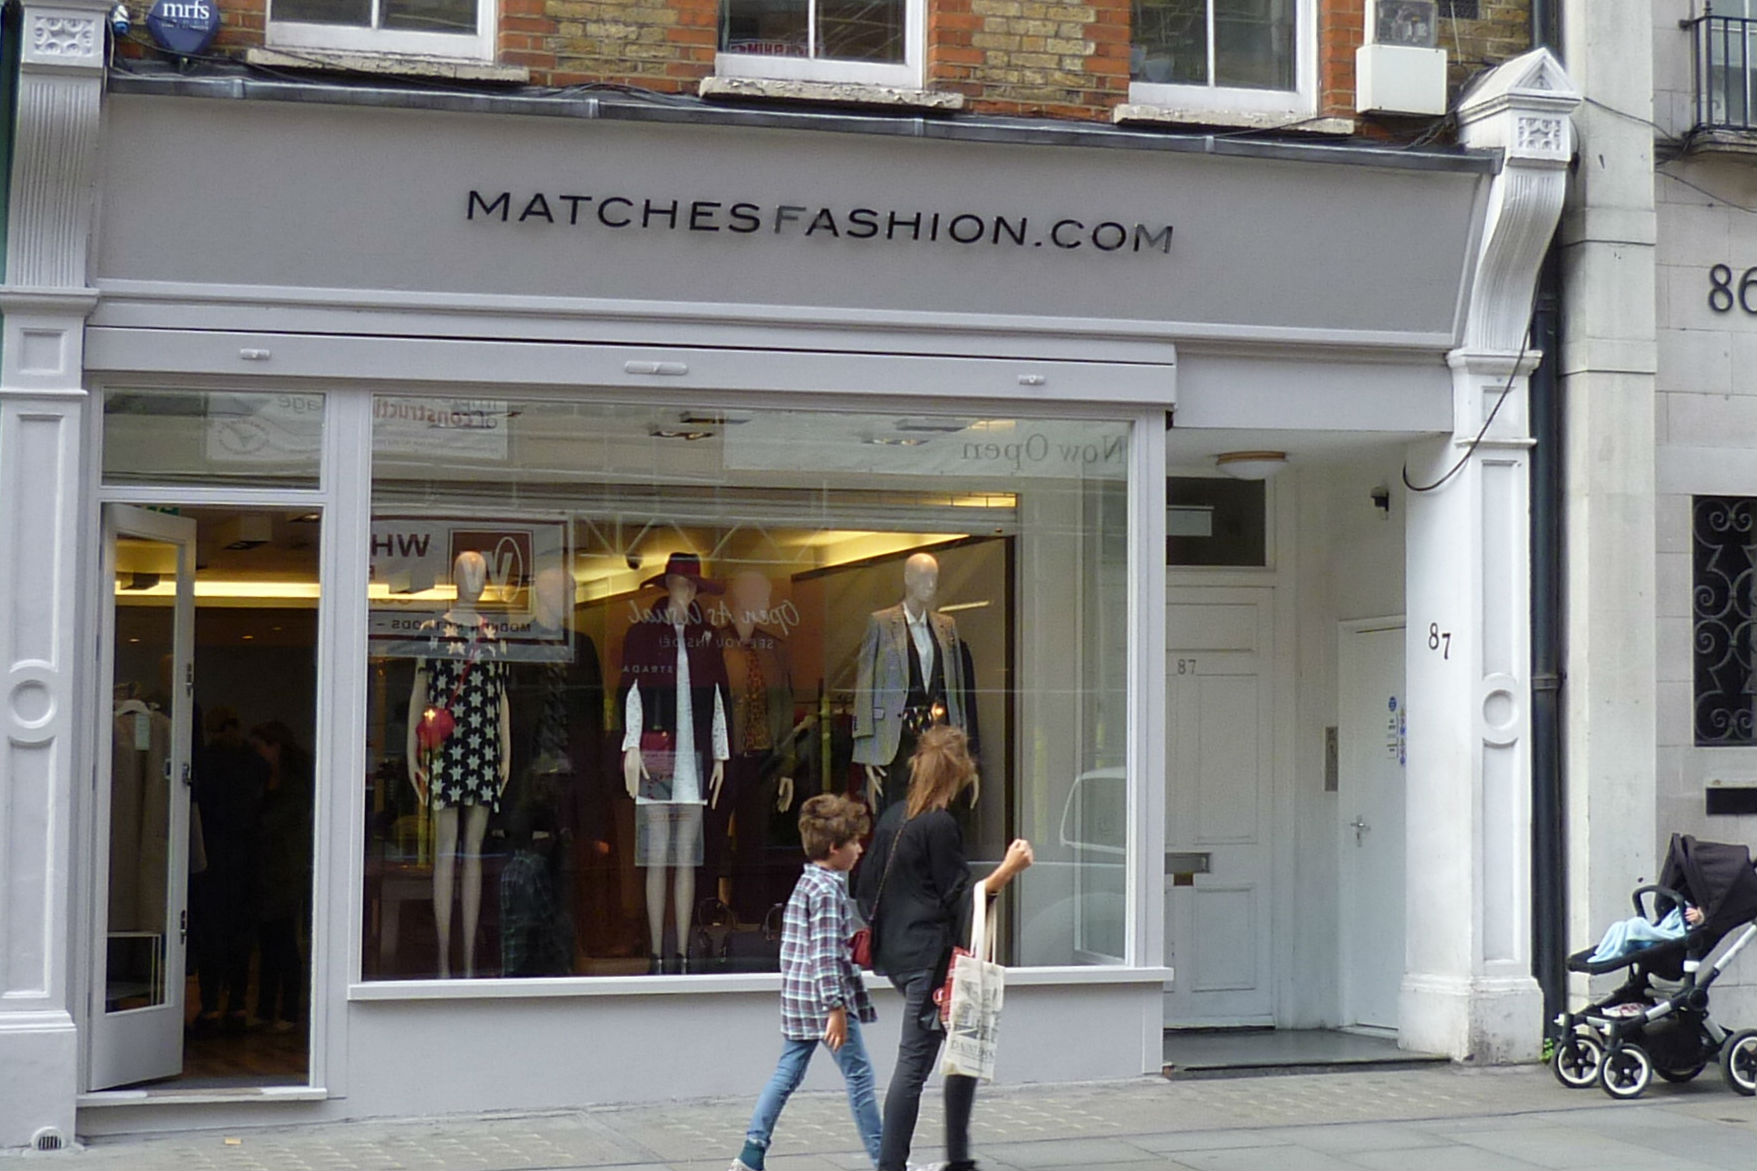 MATCHESFASHION Has Been Bought For $1 Billion USD